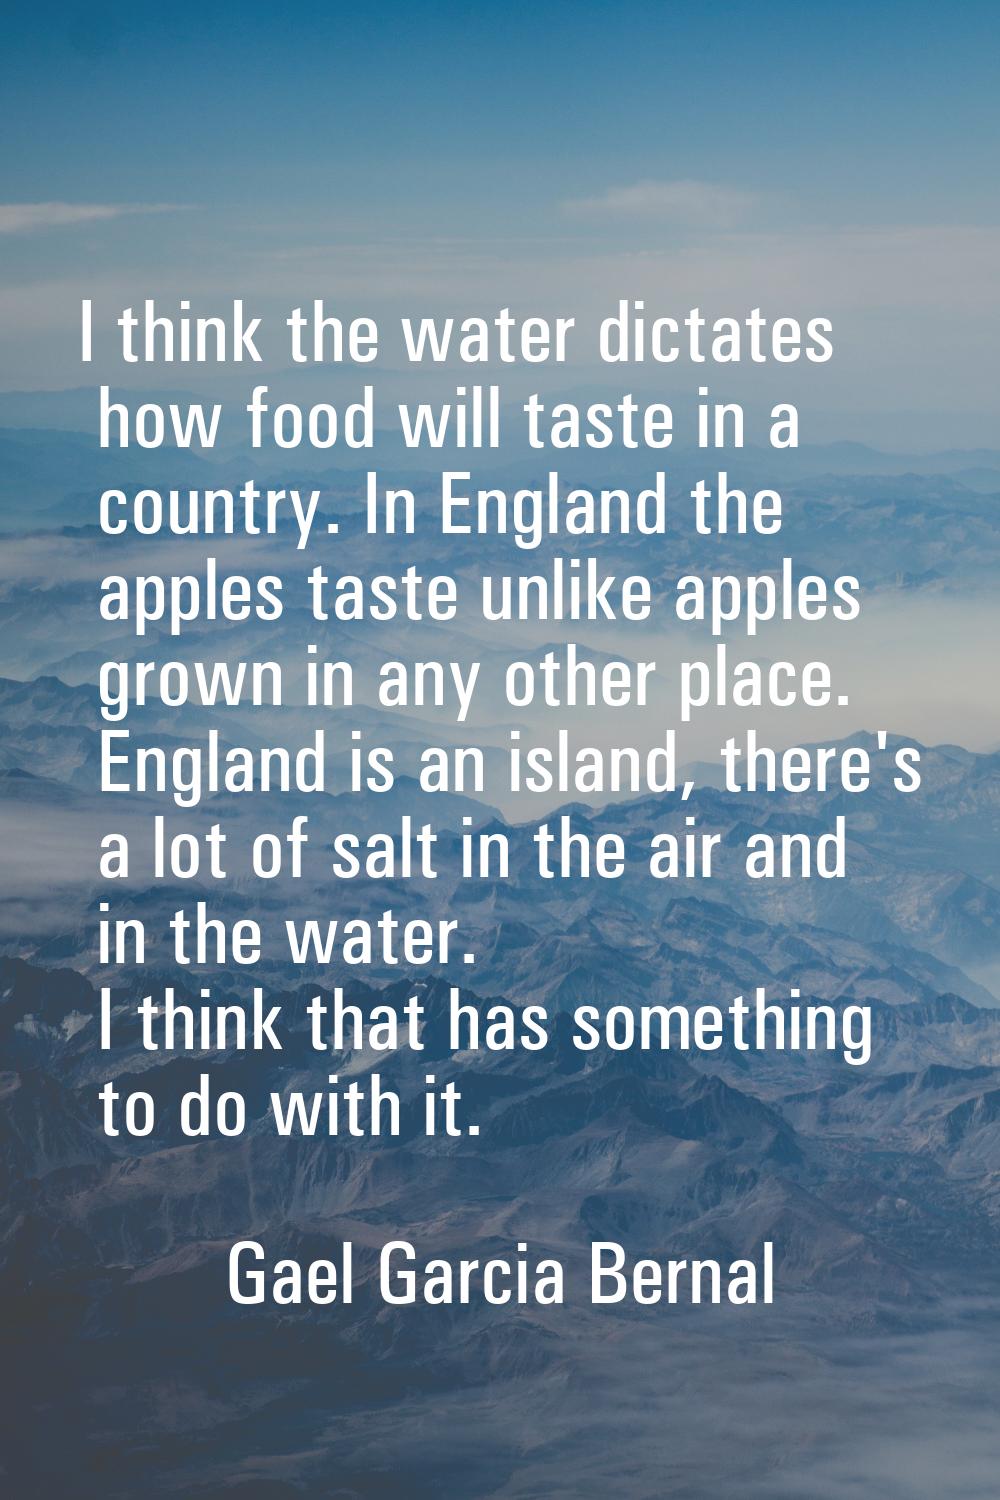 I think the water dictates how food will taste in a country. In England the apples taste unlike app